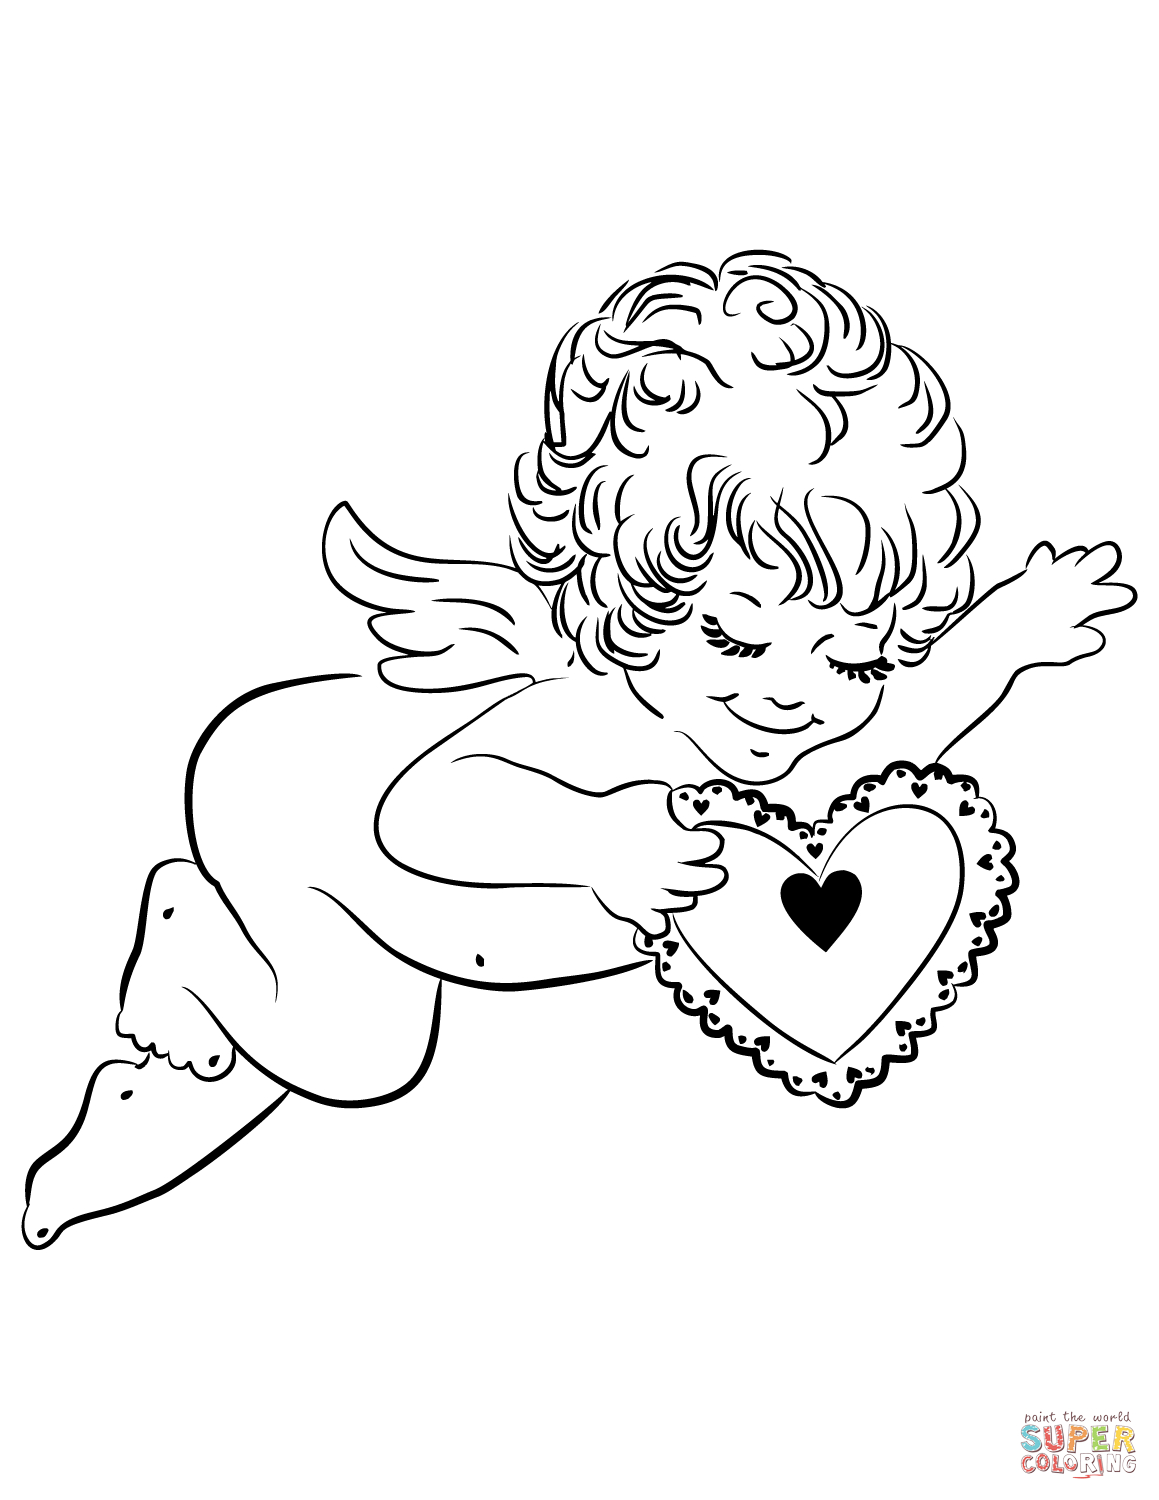 Cupid Coloring Pages | Free Printable Pictures - Free Printable Pictures Of Cupid